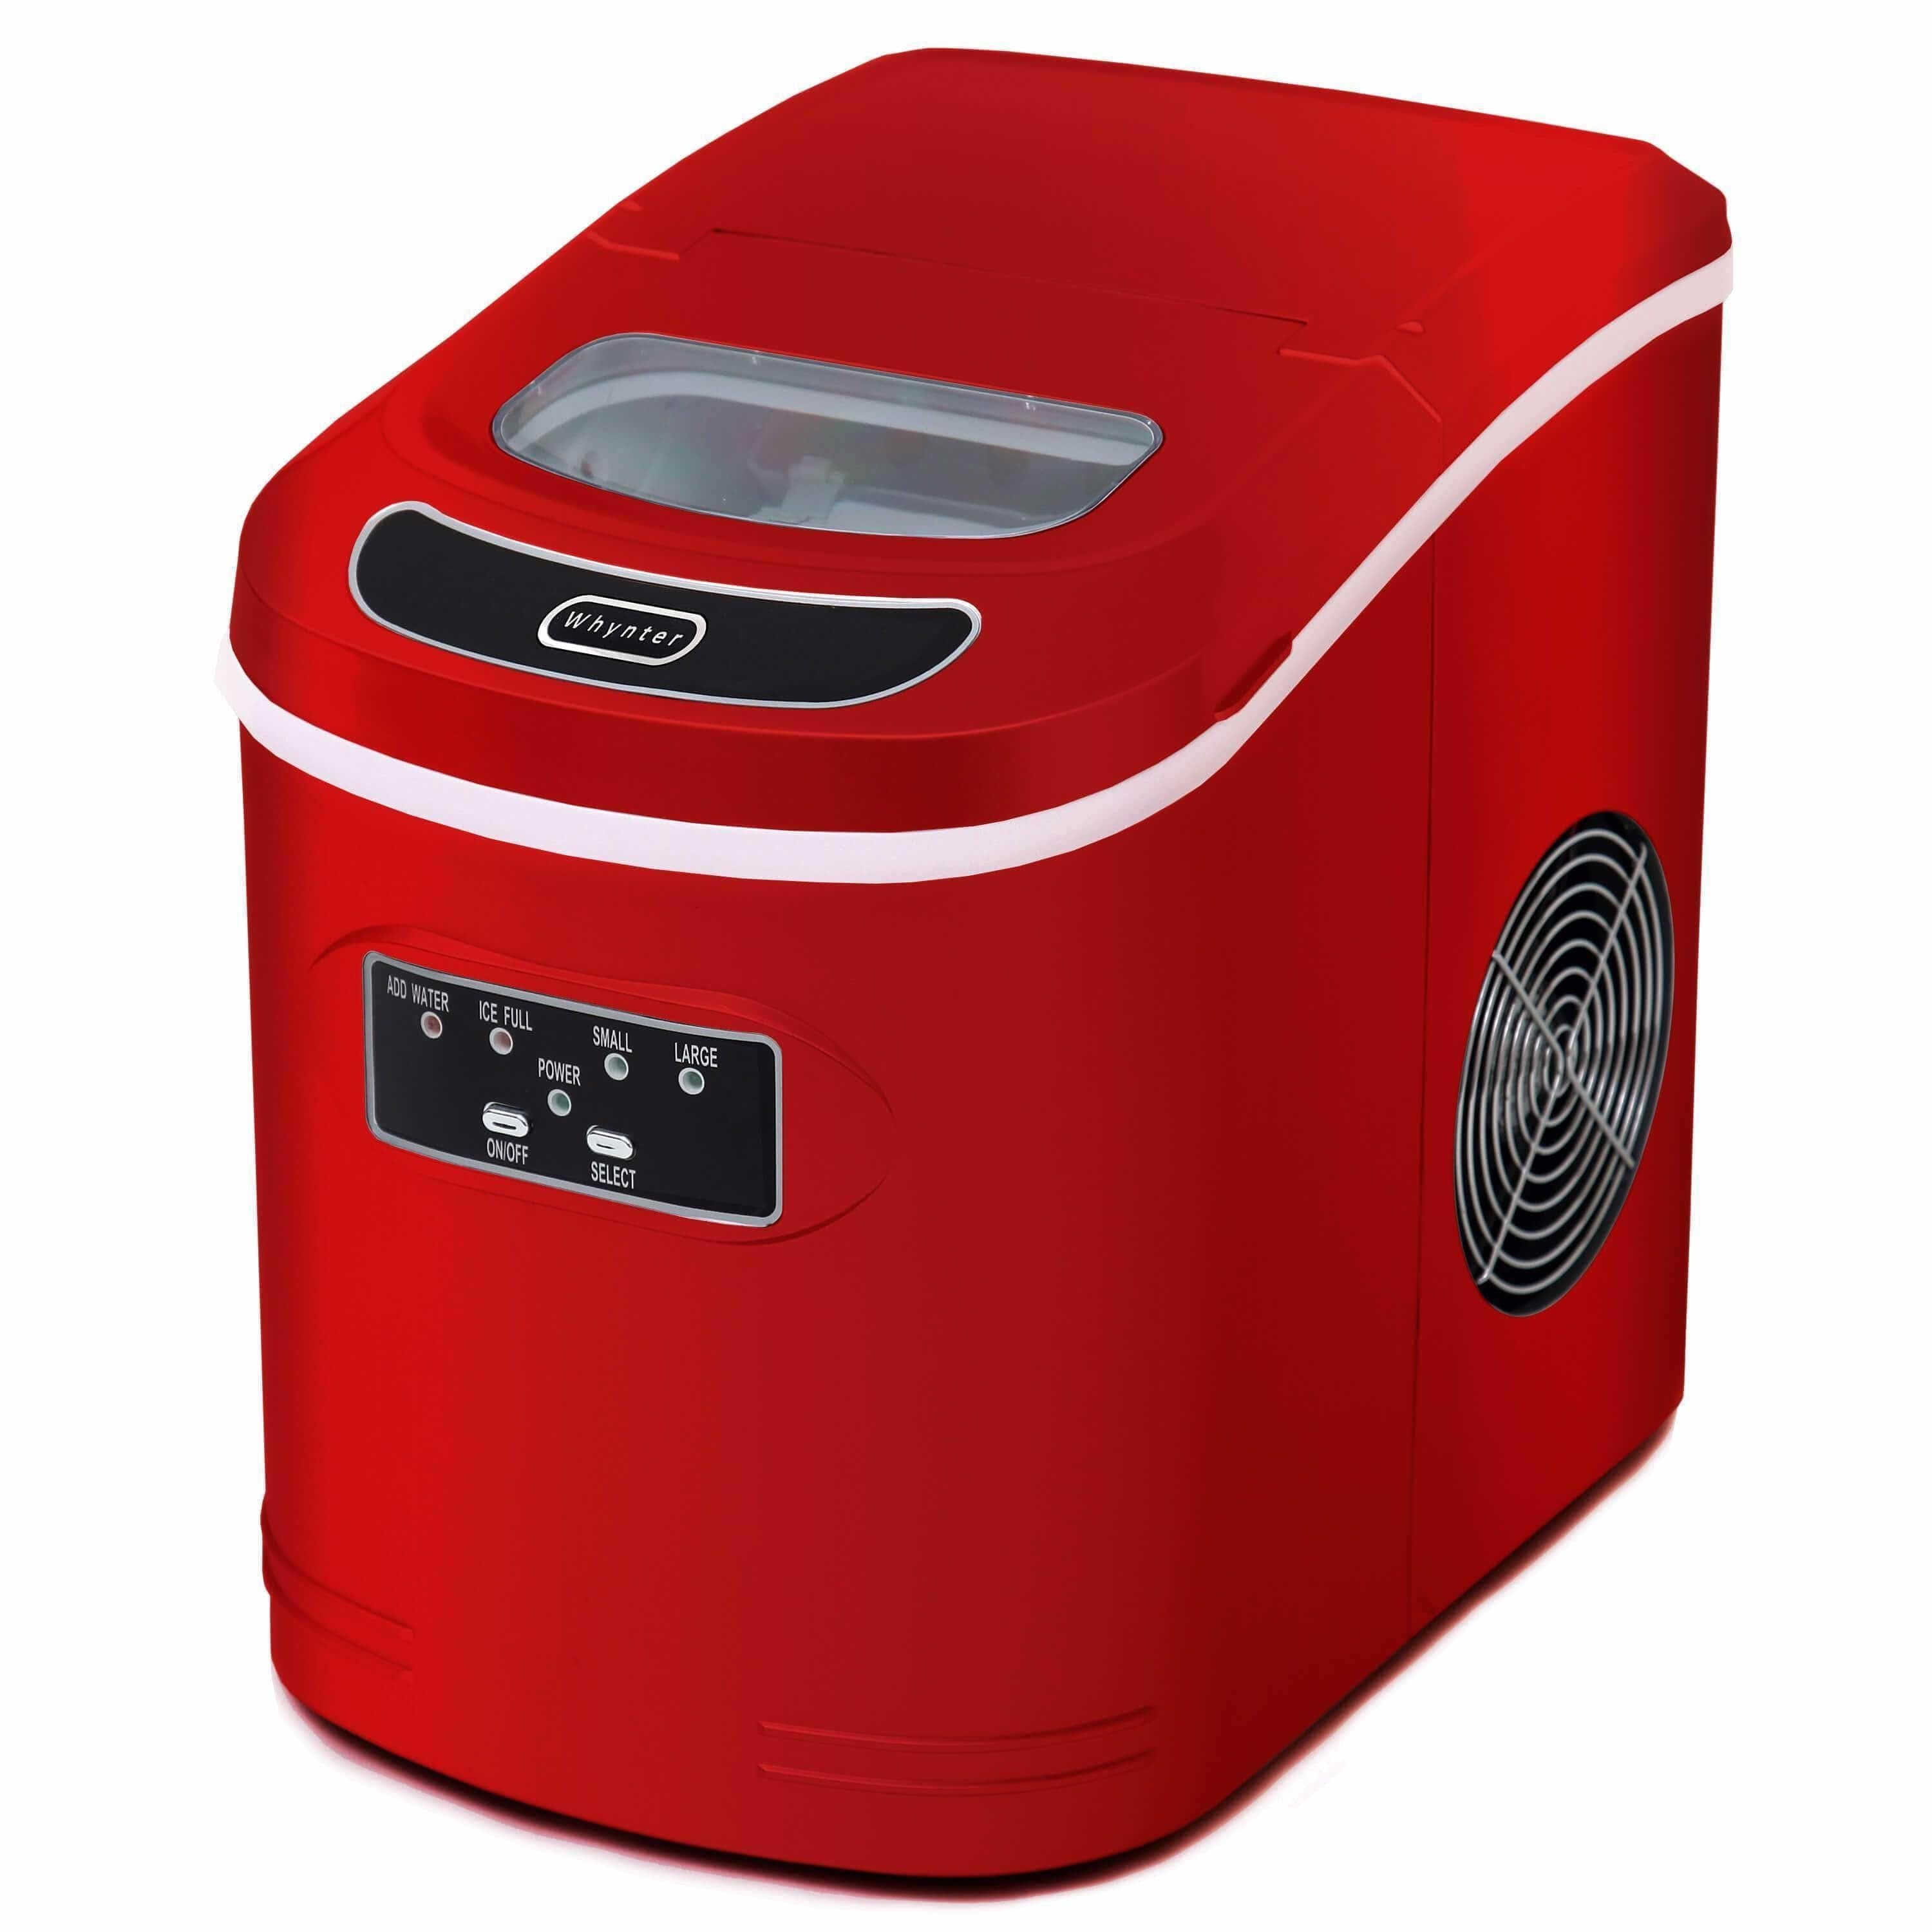 Whynter Compact Portable Ice Maker 27 lb capacity Red IMC-270MR Wine Coolers Empire